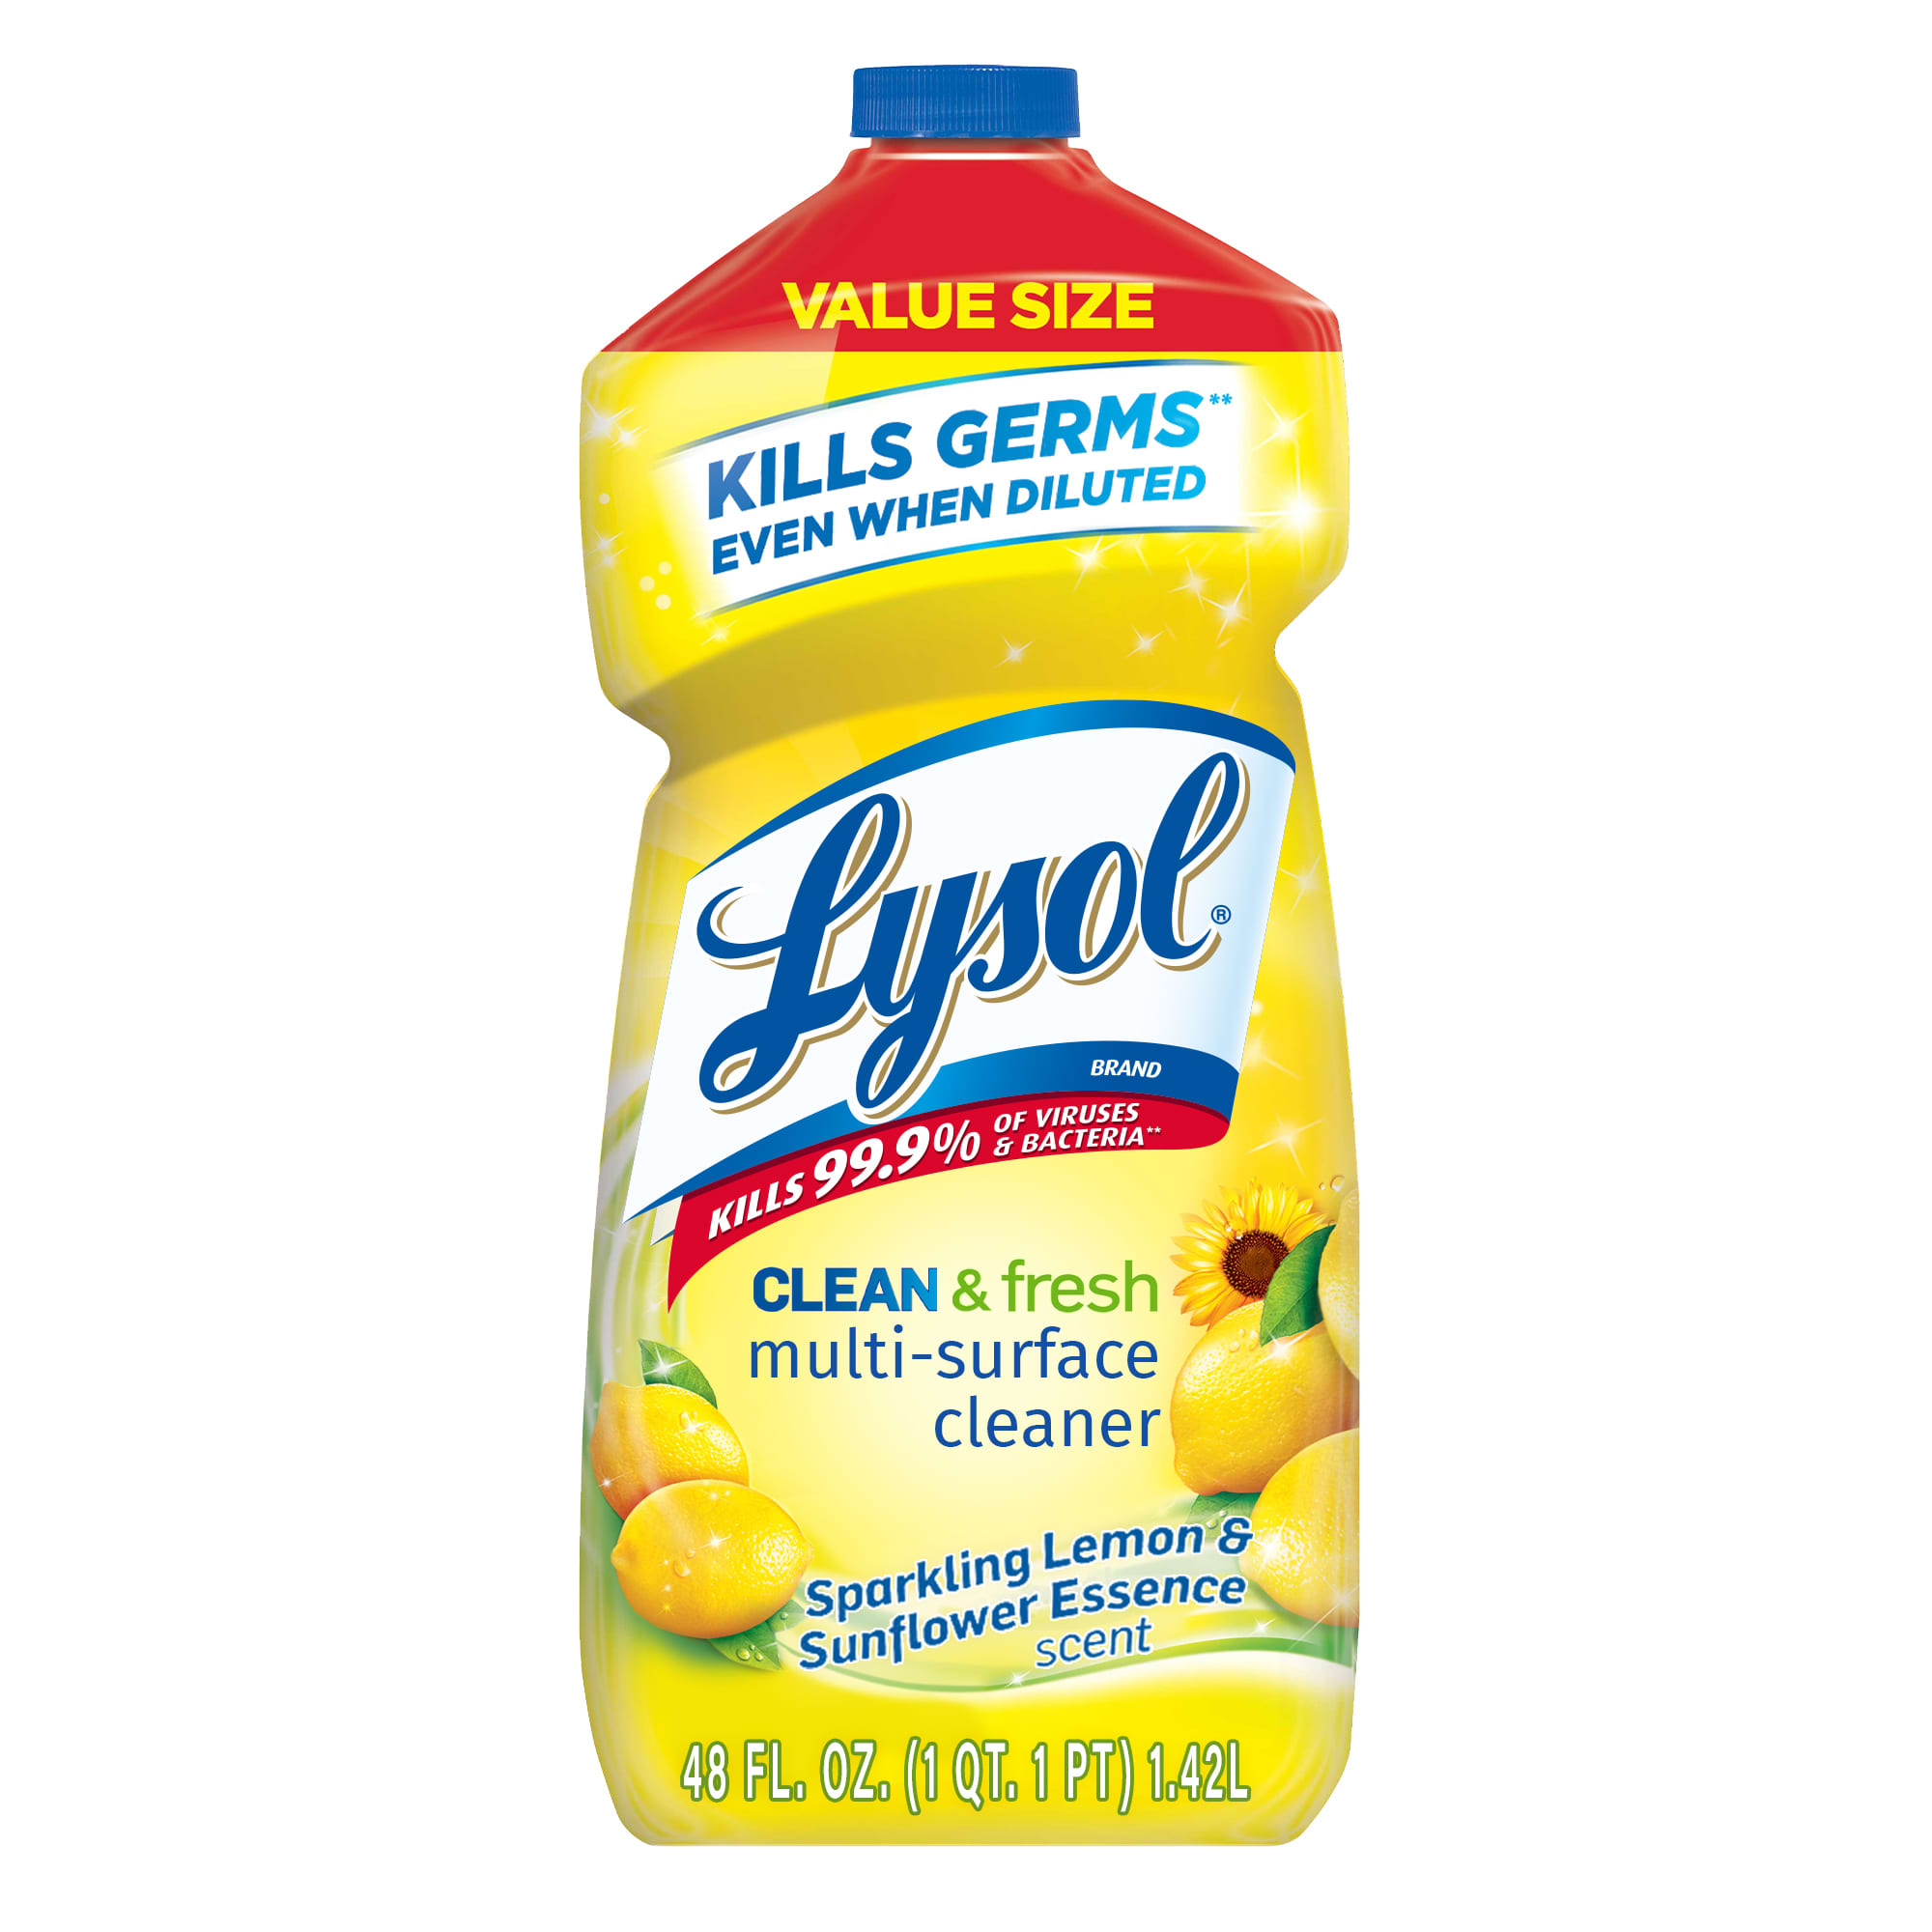 https://cdn.apartmenttherapy.info/image/upload/v1617203712/gen-workflow/product-database/lysol_clean_and_fresh.jpg